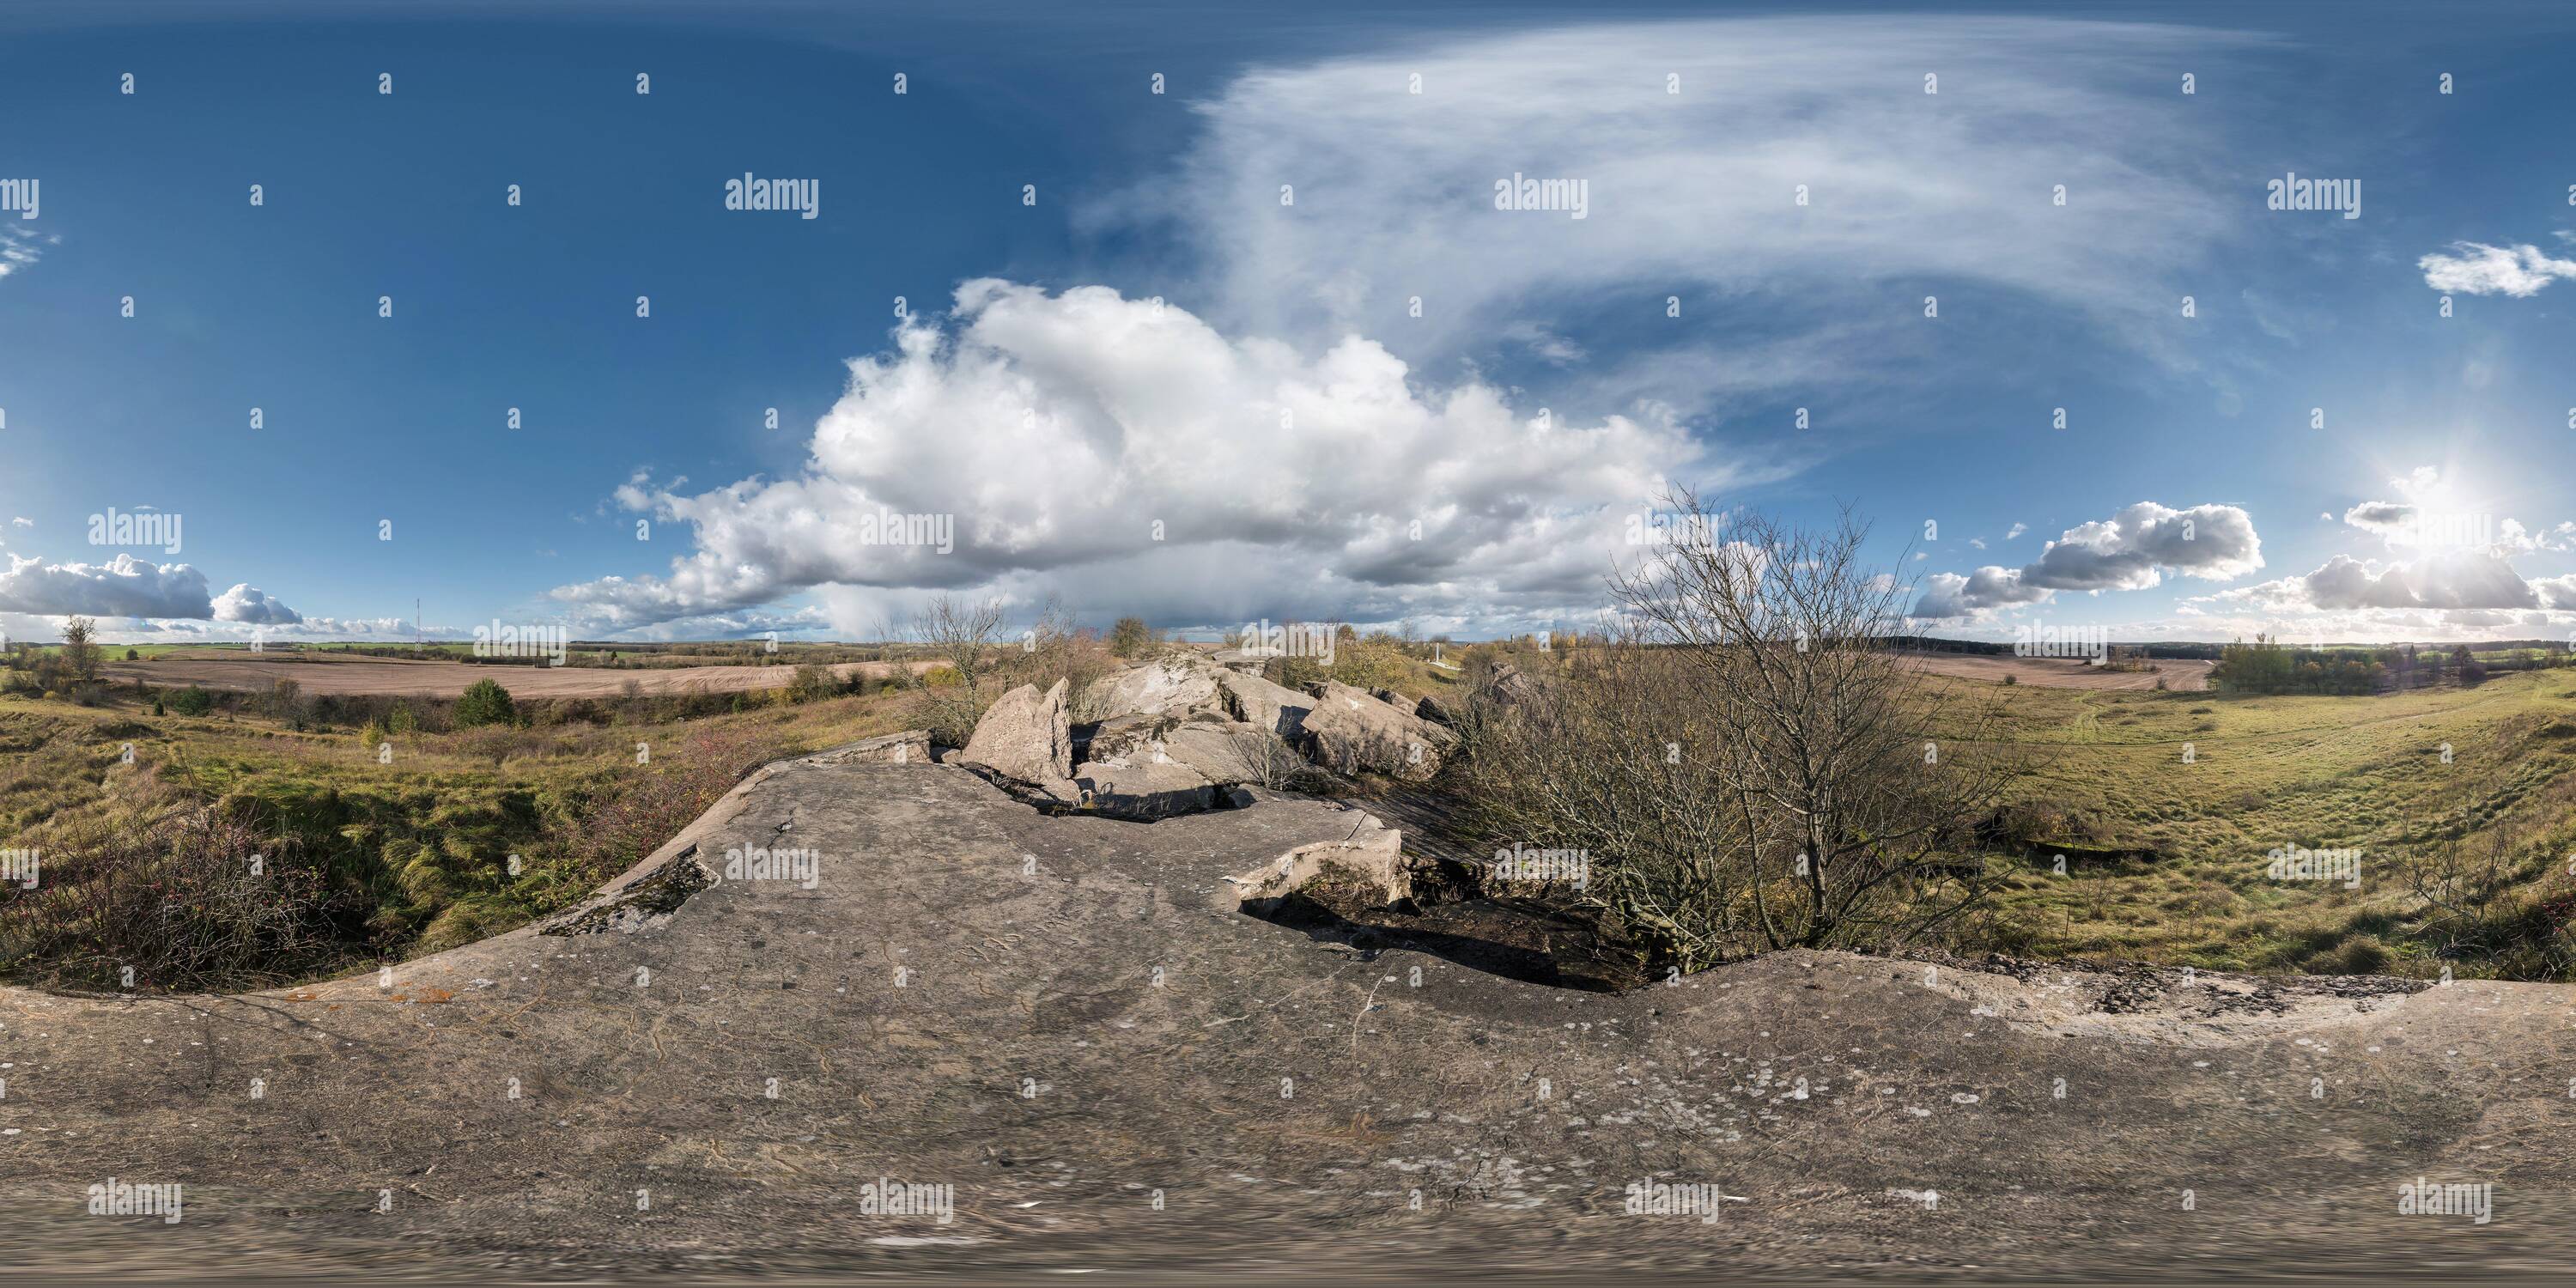 360° view of Full 360 equirectangular spherical panorama as background.  Approaching storm on the ruined military fortress of the First World War -  Alamy